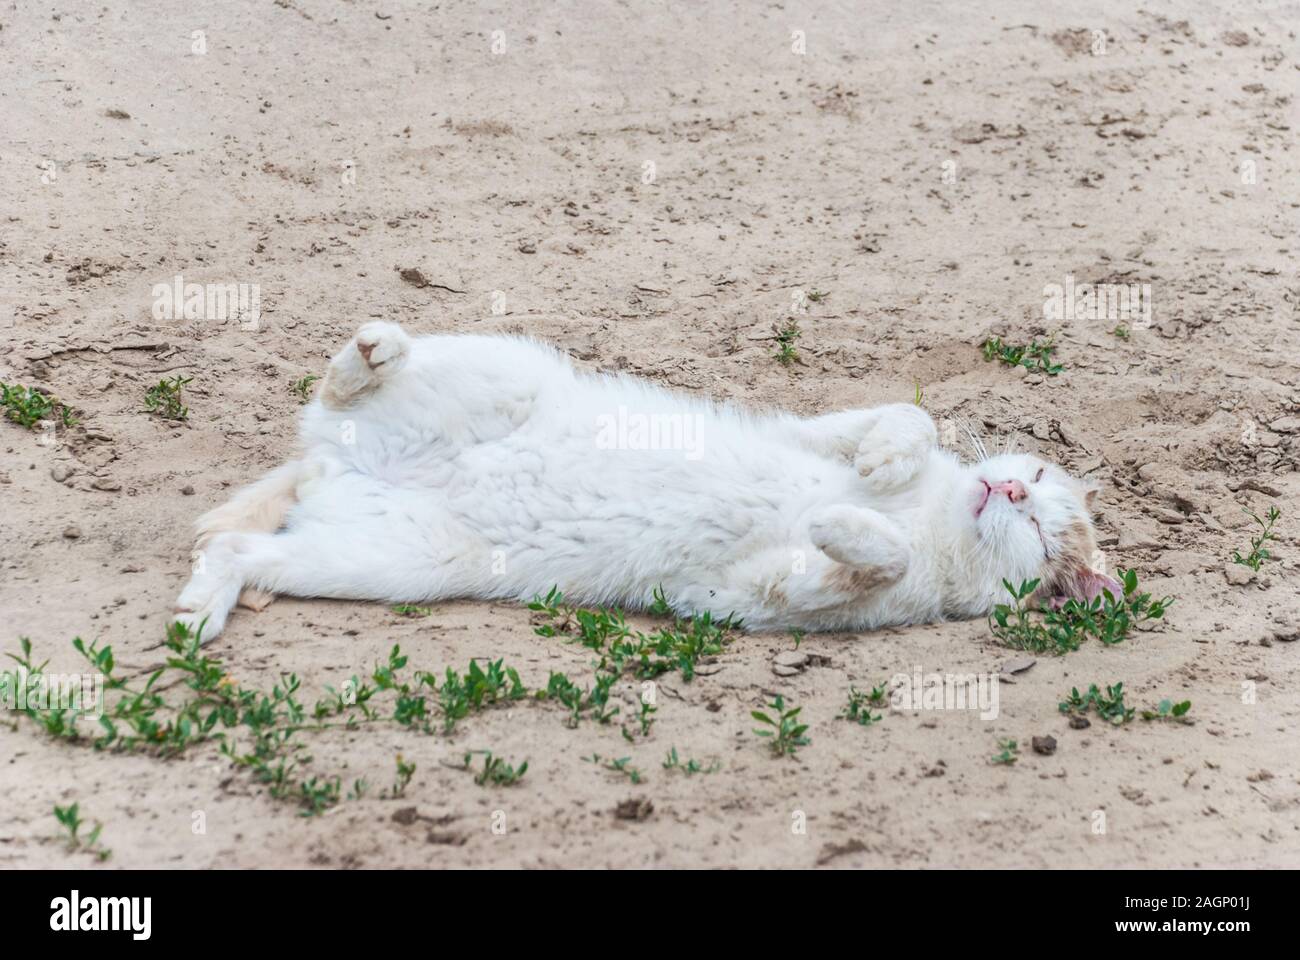 White homeless cat lies on its back in the sand outdoors and artistically depicts a dying victim Stock Photo